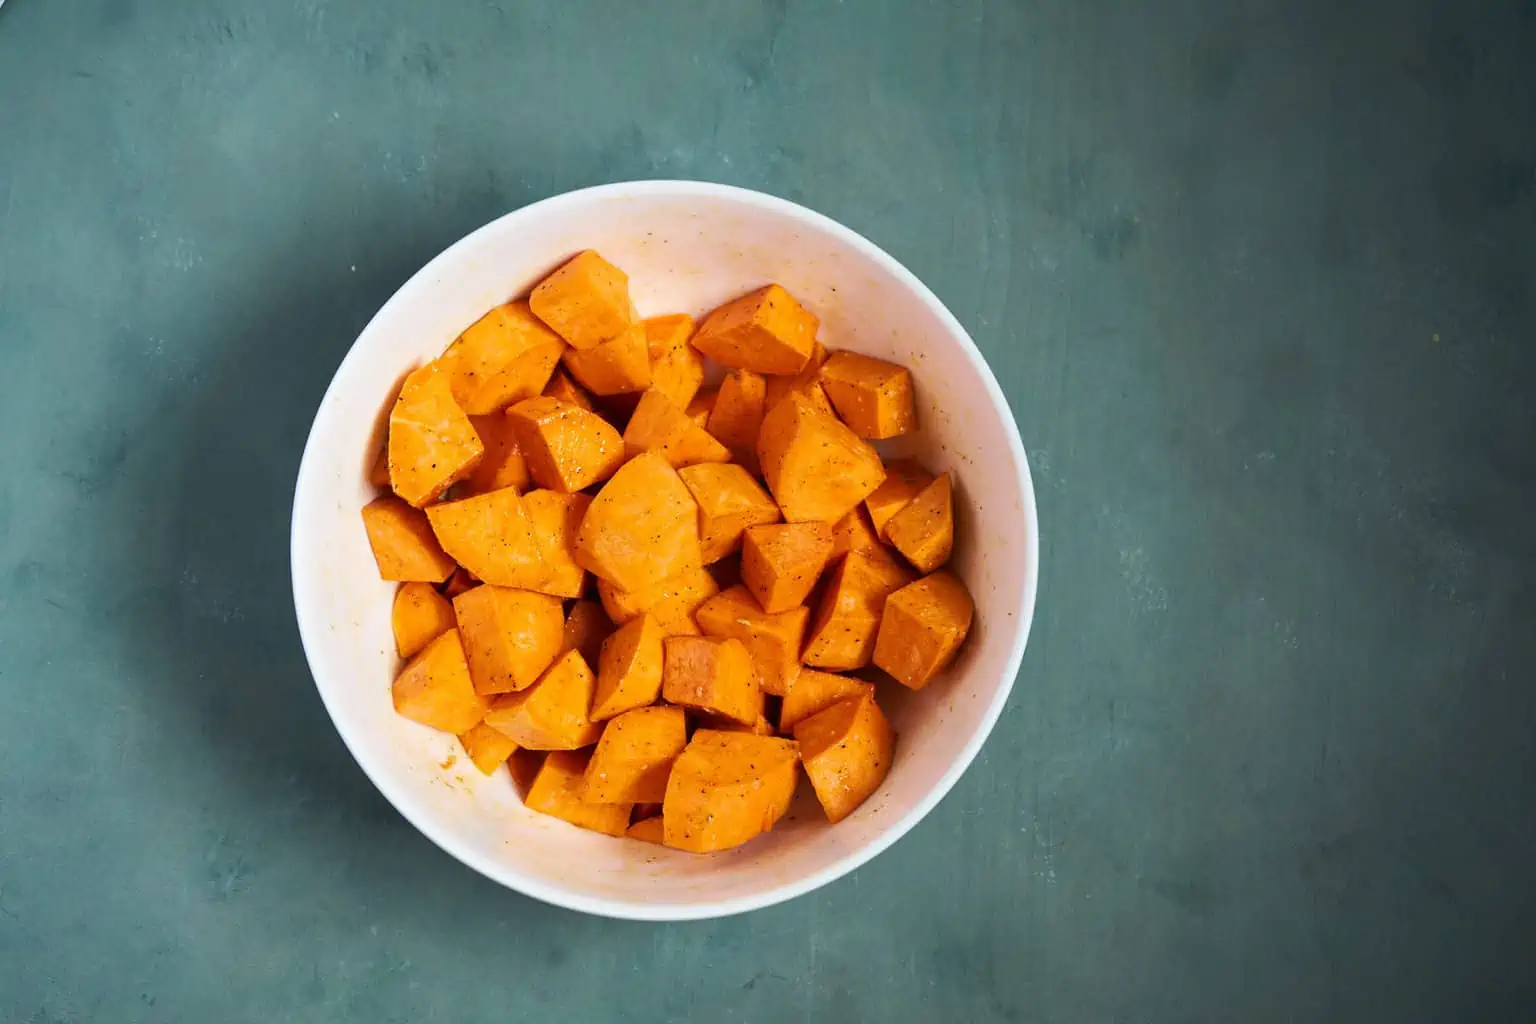 Chunks of sweet potatoes with oil and onion soup seasoning mix.